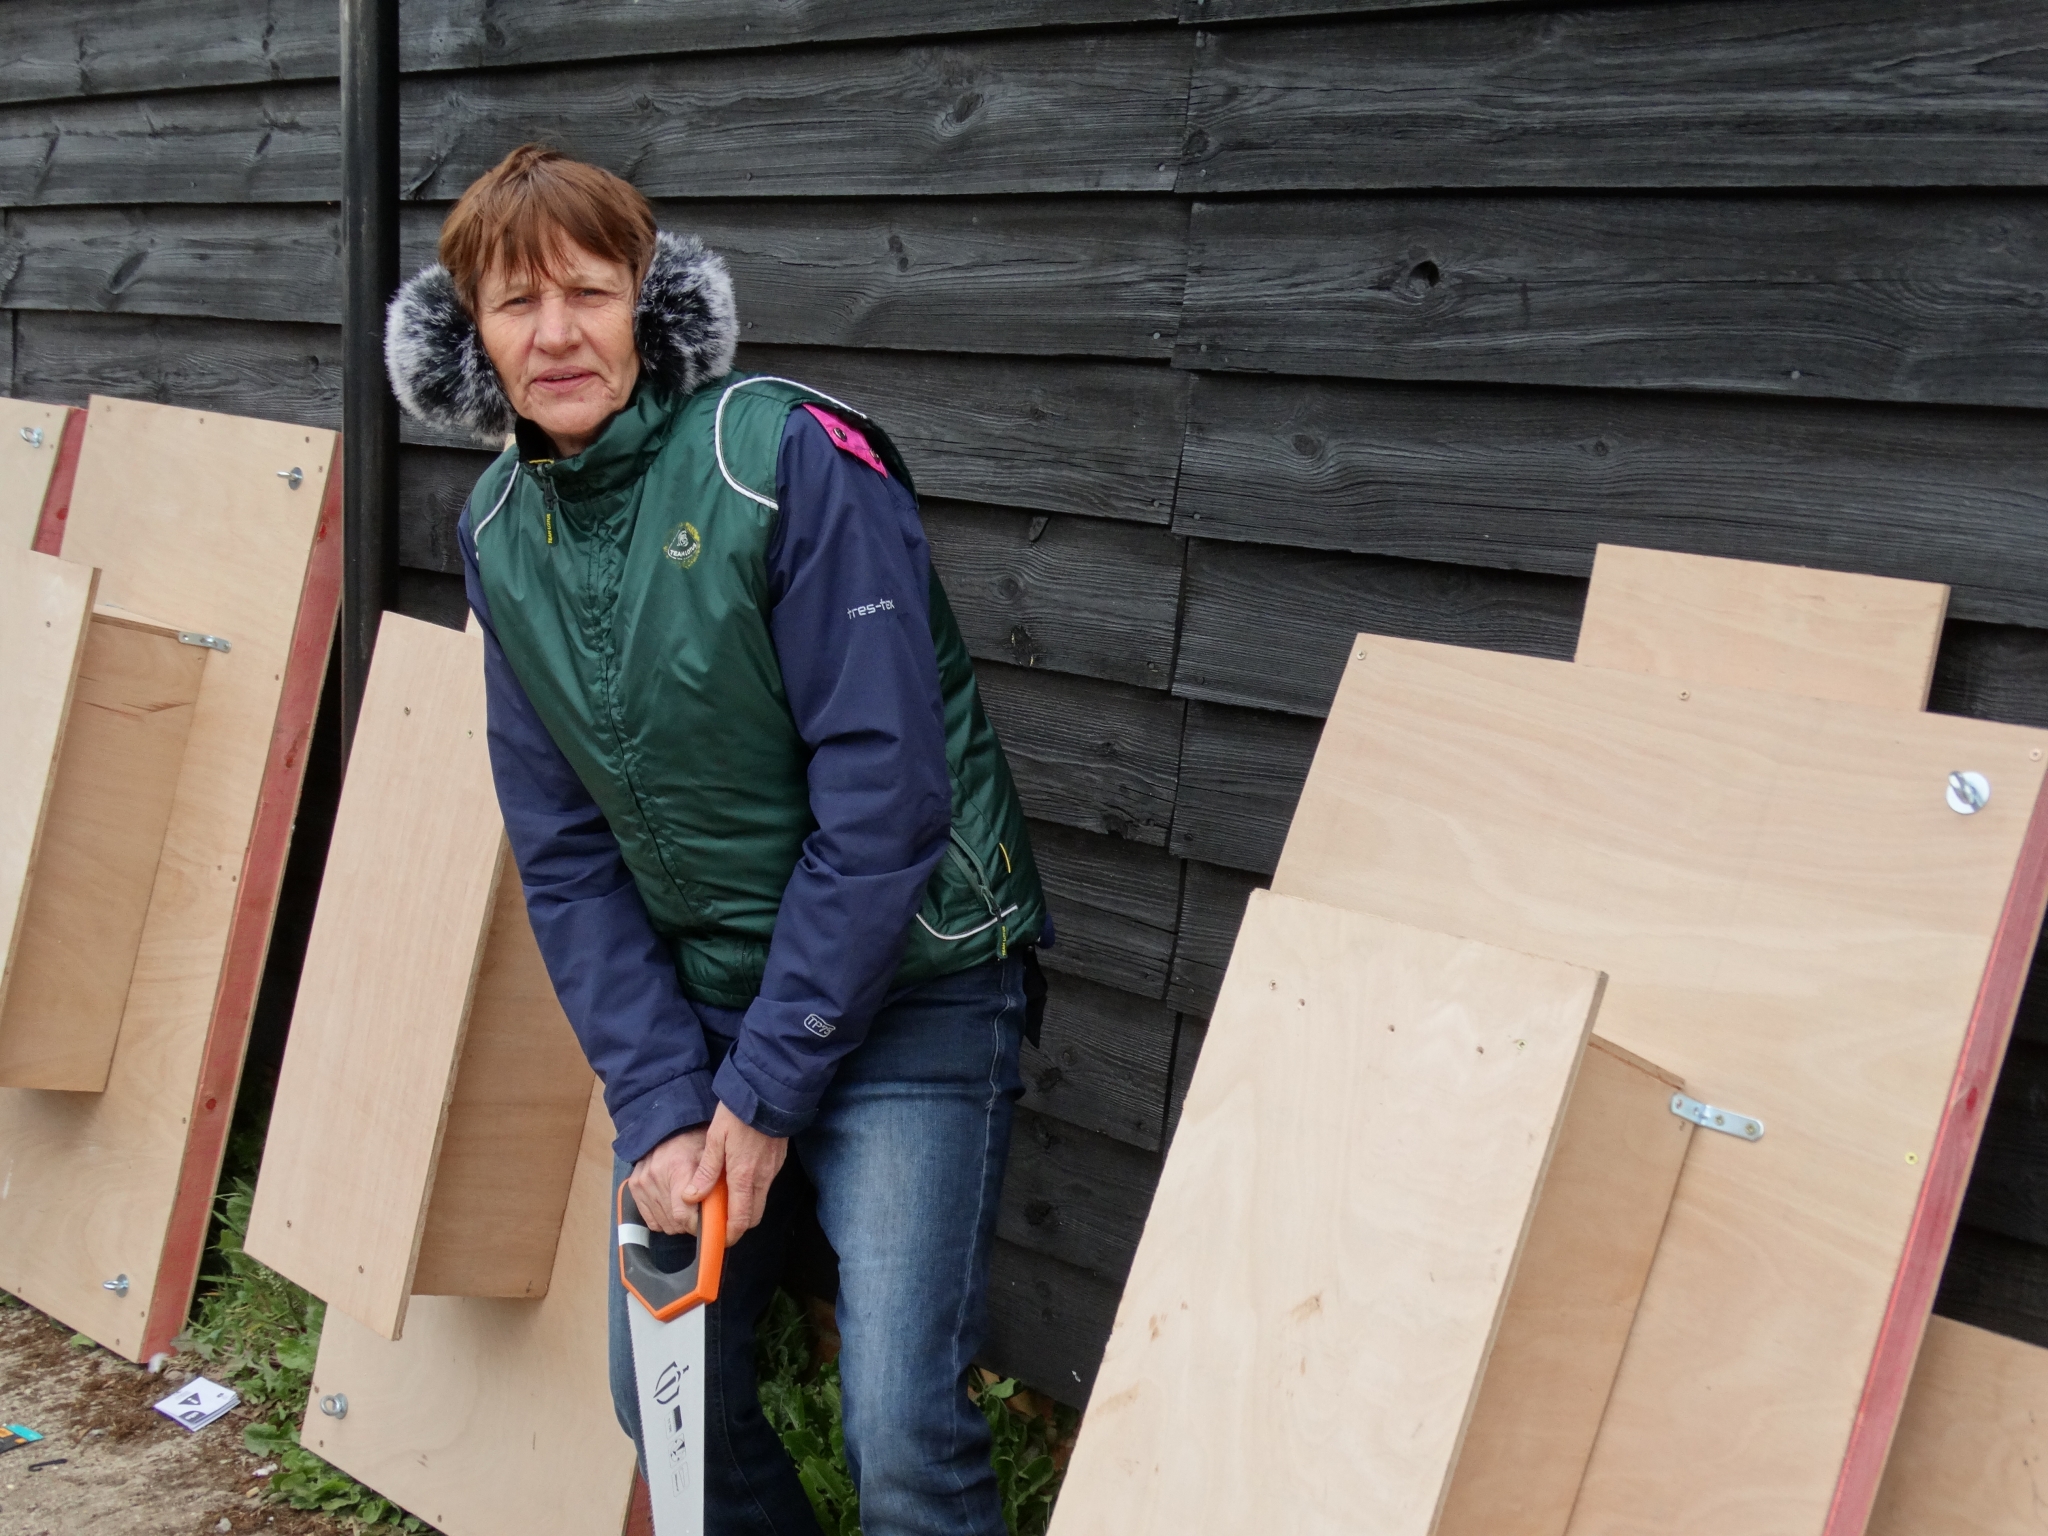 A photo from the FoTF Conservation Event - April 2019 - Mink Raft Construction at Santon Downham Workshops : A volunteers models a saw whilst partially constructed mink rafts stand up against the workshop in the background